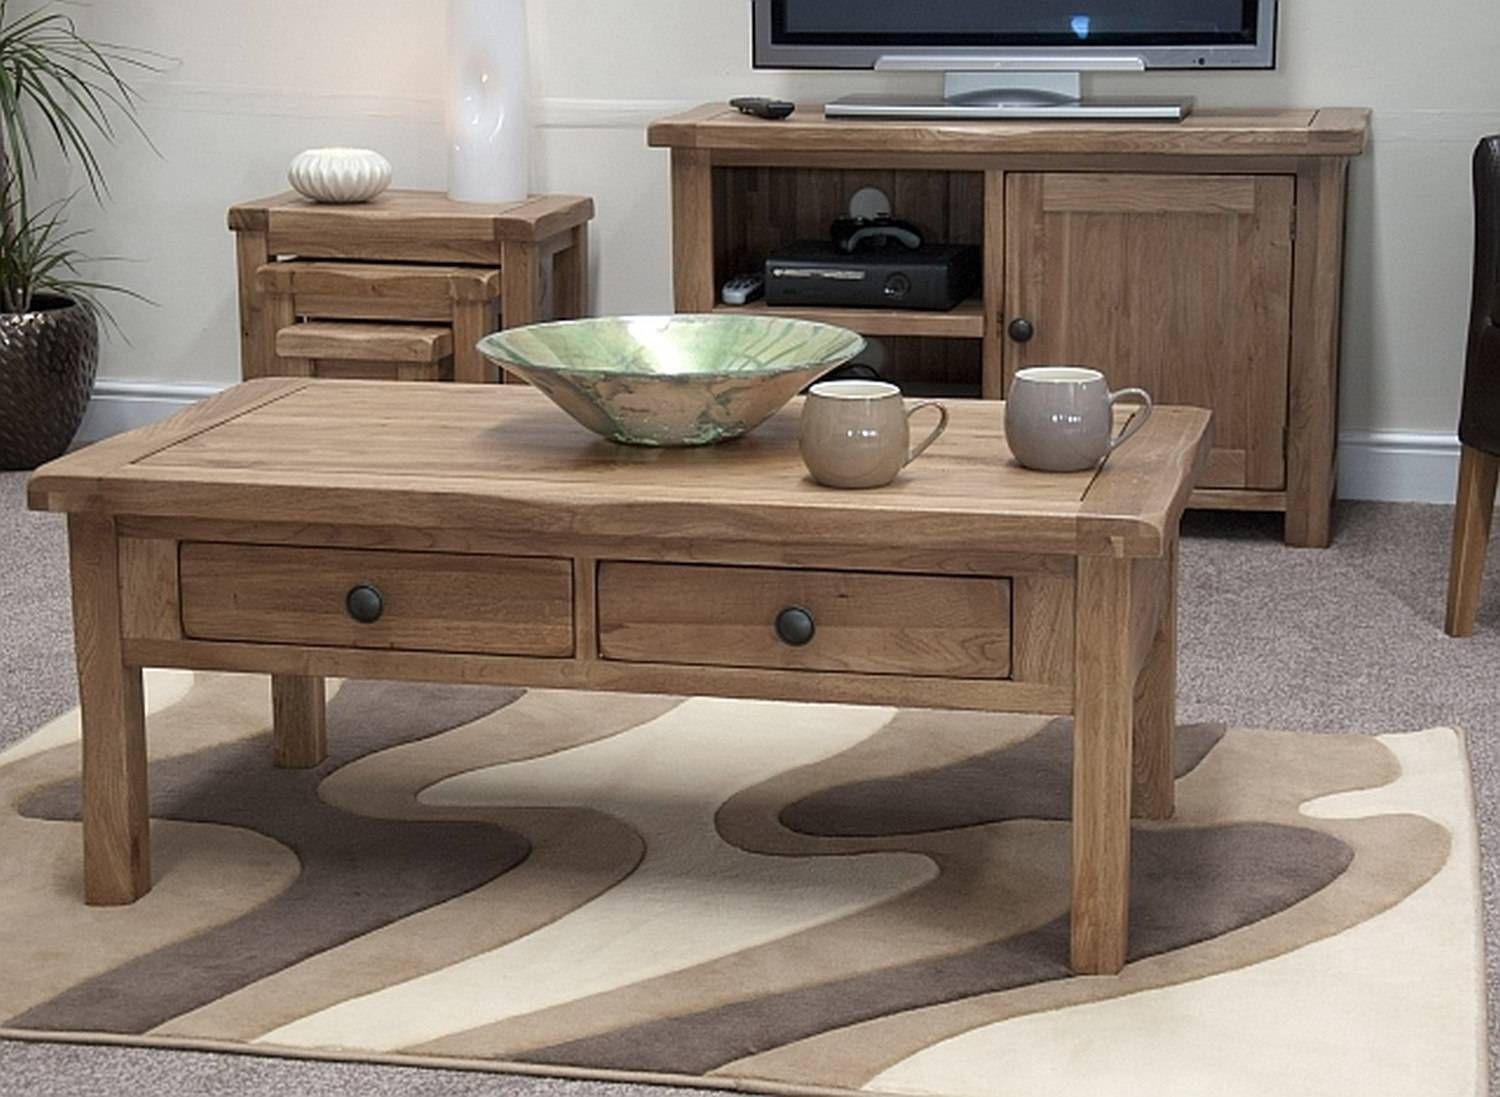 Modern Wood Canyon Oak Coffee Table Living Room Furniture Shelf Pertaining To Rustic Oak Coffee Table With Drawers (View 14 of 15)